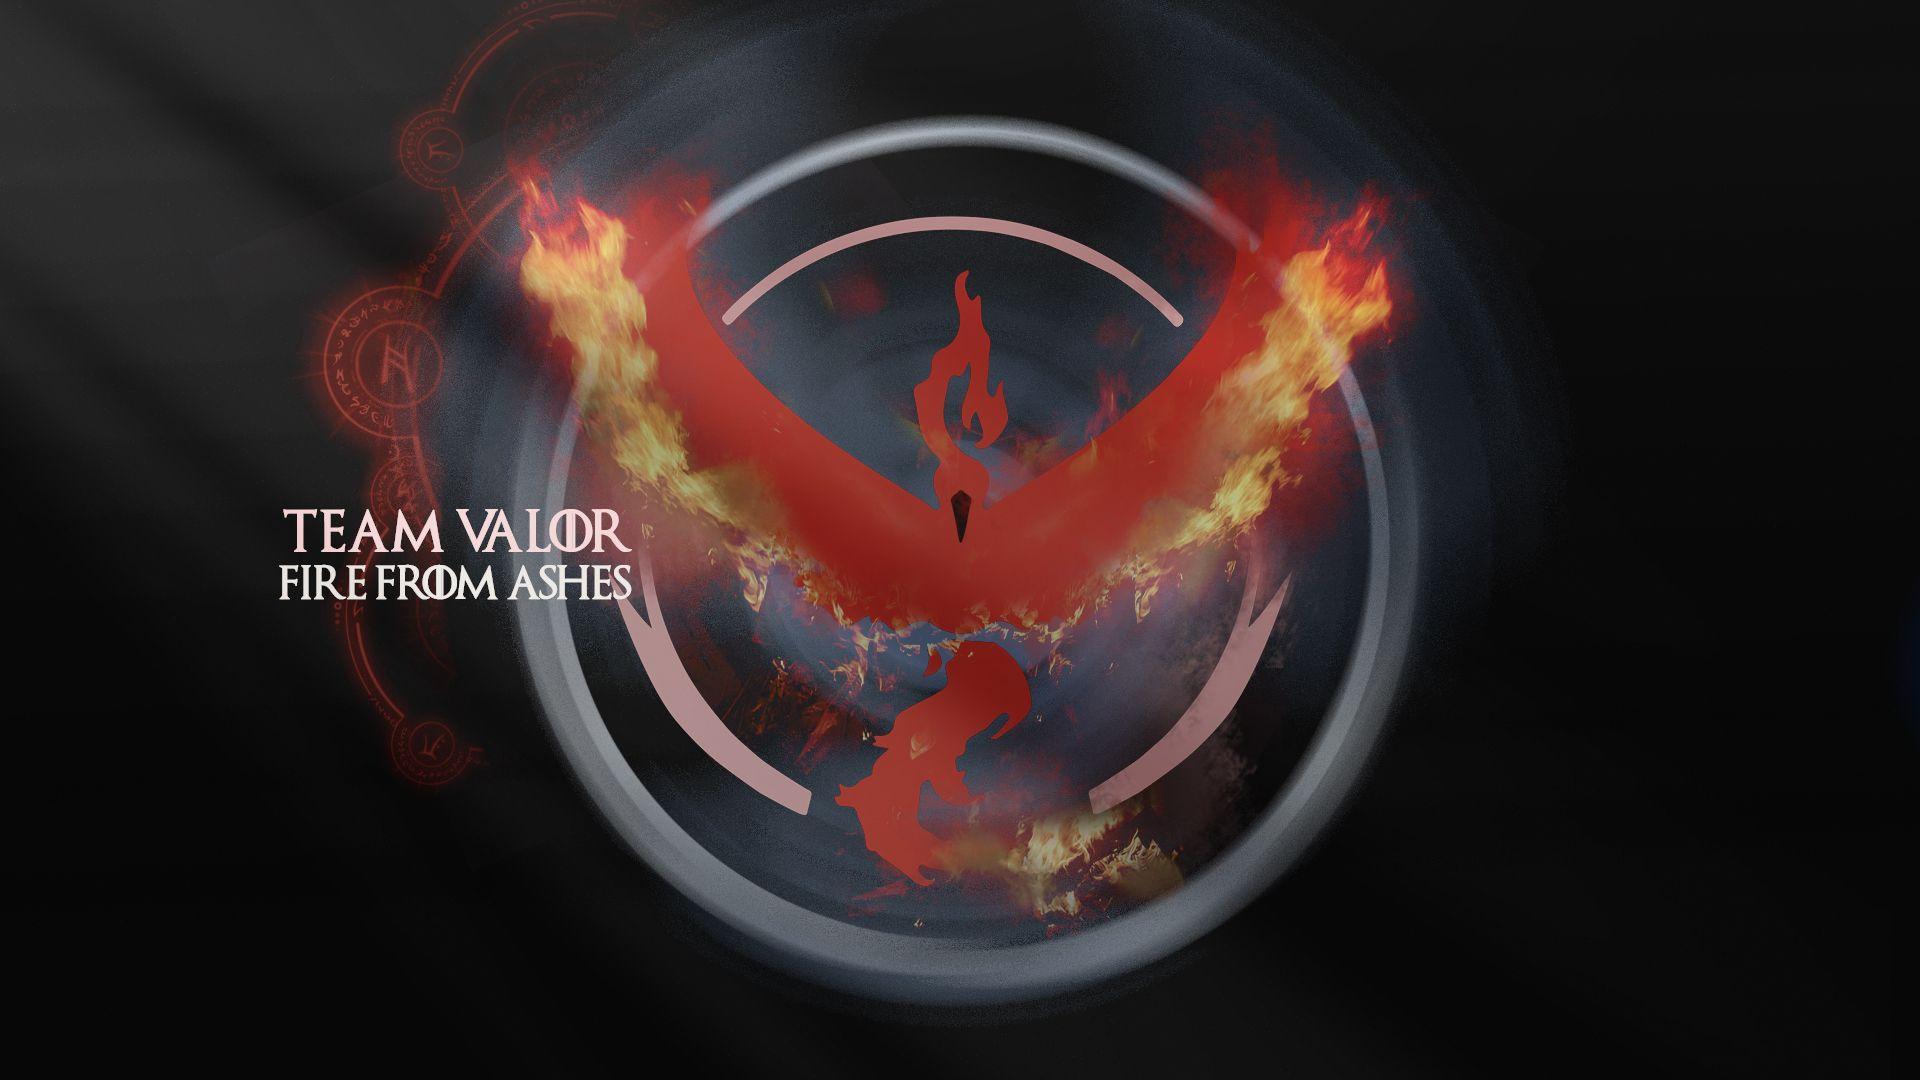 My GF made a Game of Thrones style Team Valor Wallpaper after